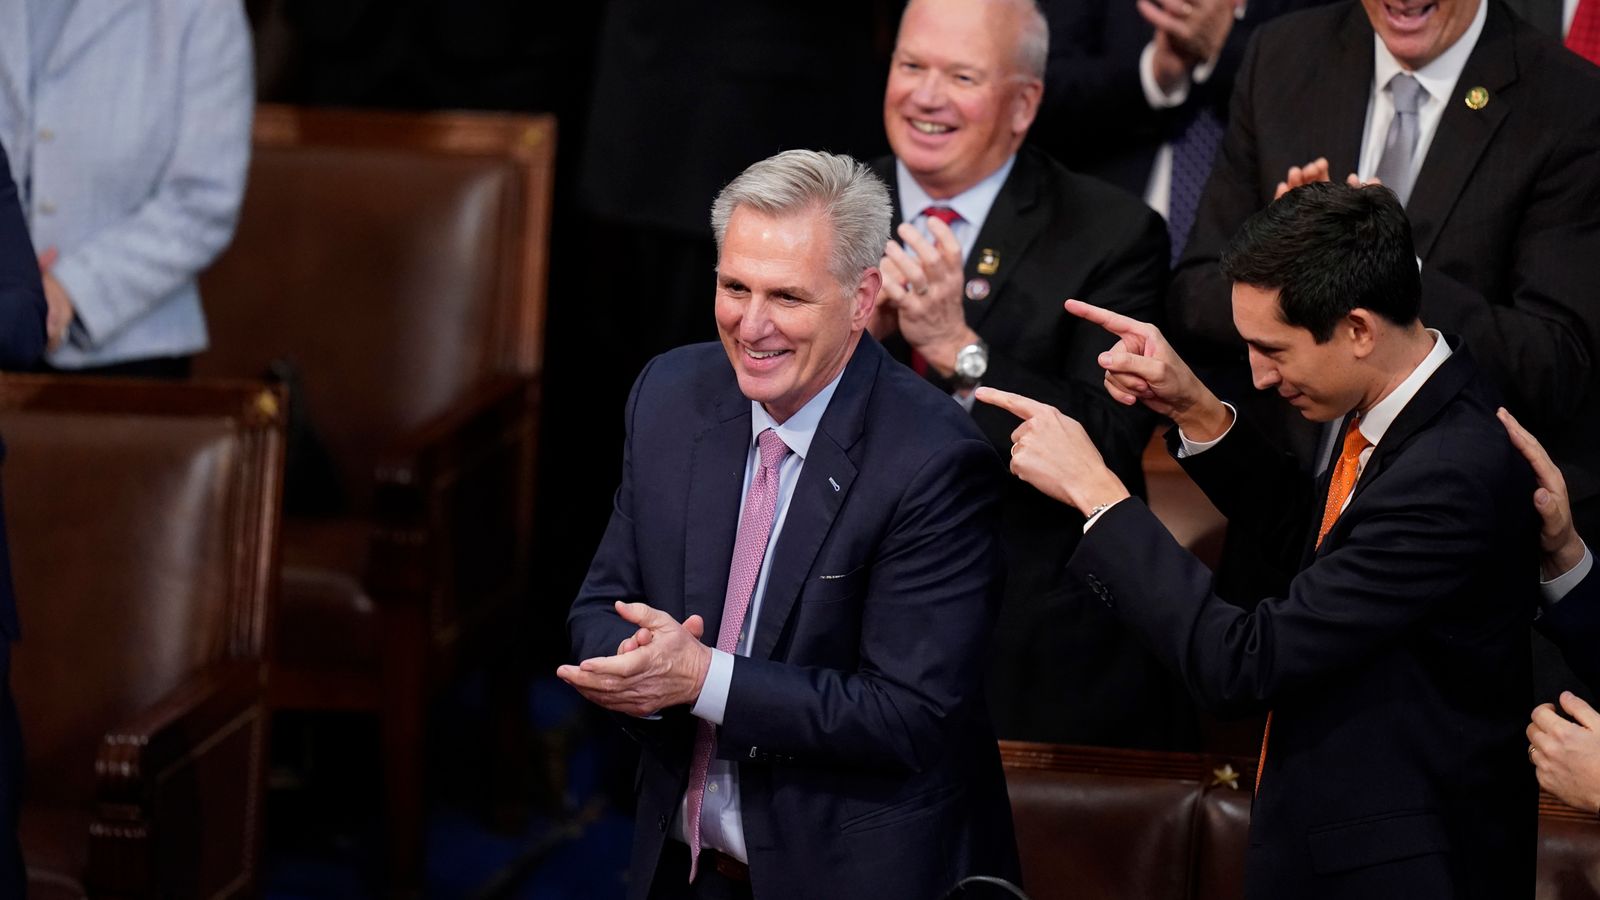 Kevin McCarthy finally wins US Speaker vote after tensions boil over in Congress